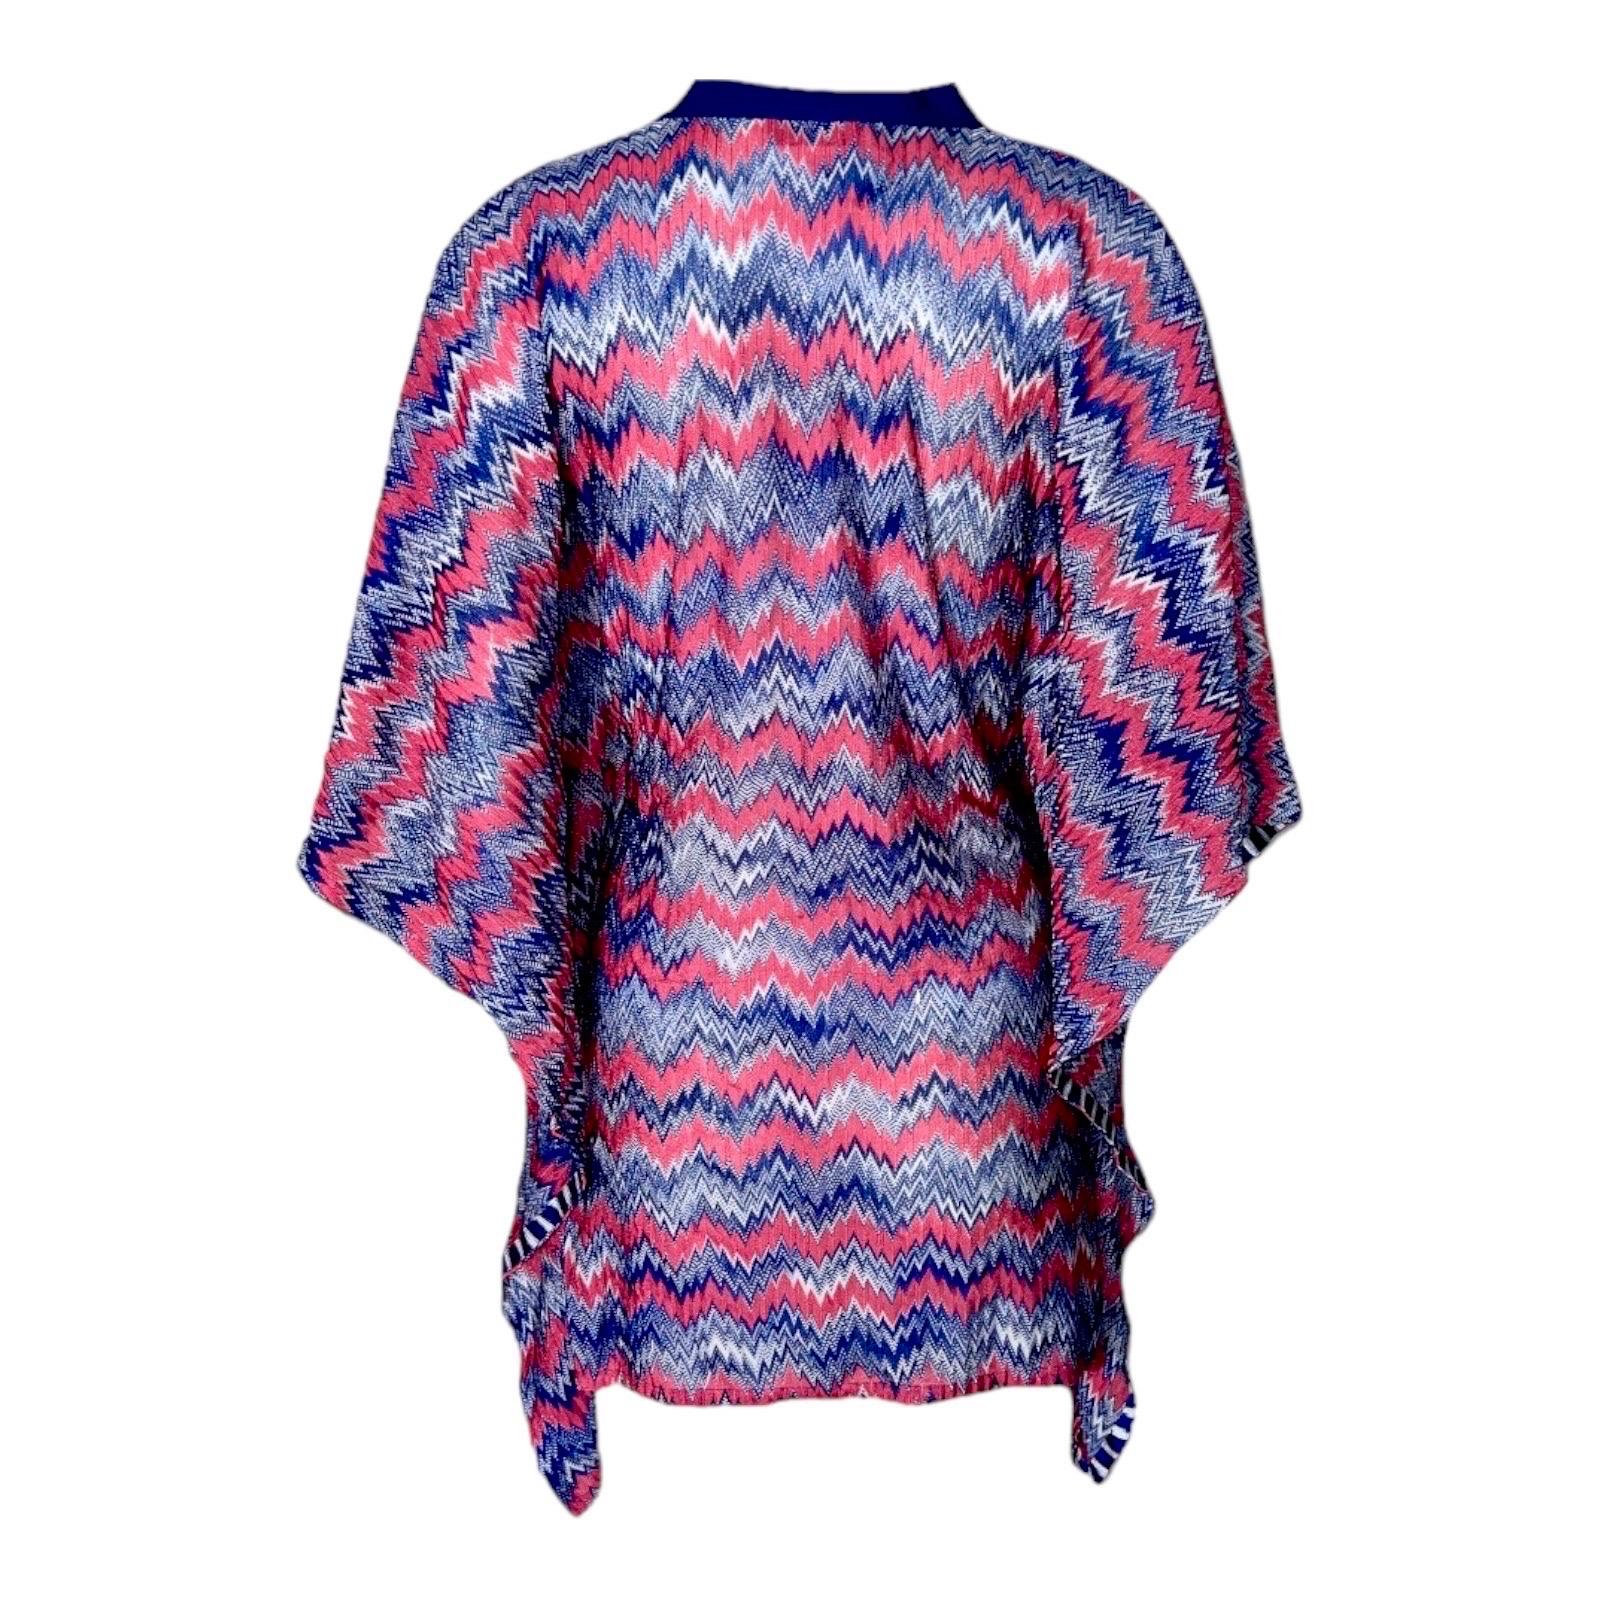 This Missoni kaftan is made from its signature crochet-knit and will look stunning with your bikini. Perfect for your next vacation, it's crease-resistant and takes up next to no space when folded.

Beautiful colors and shades shades
Contrast